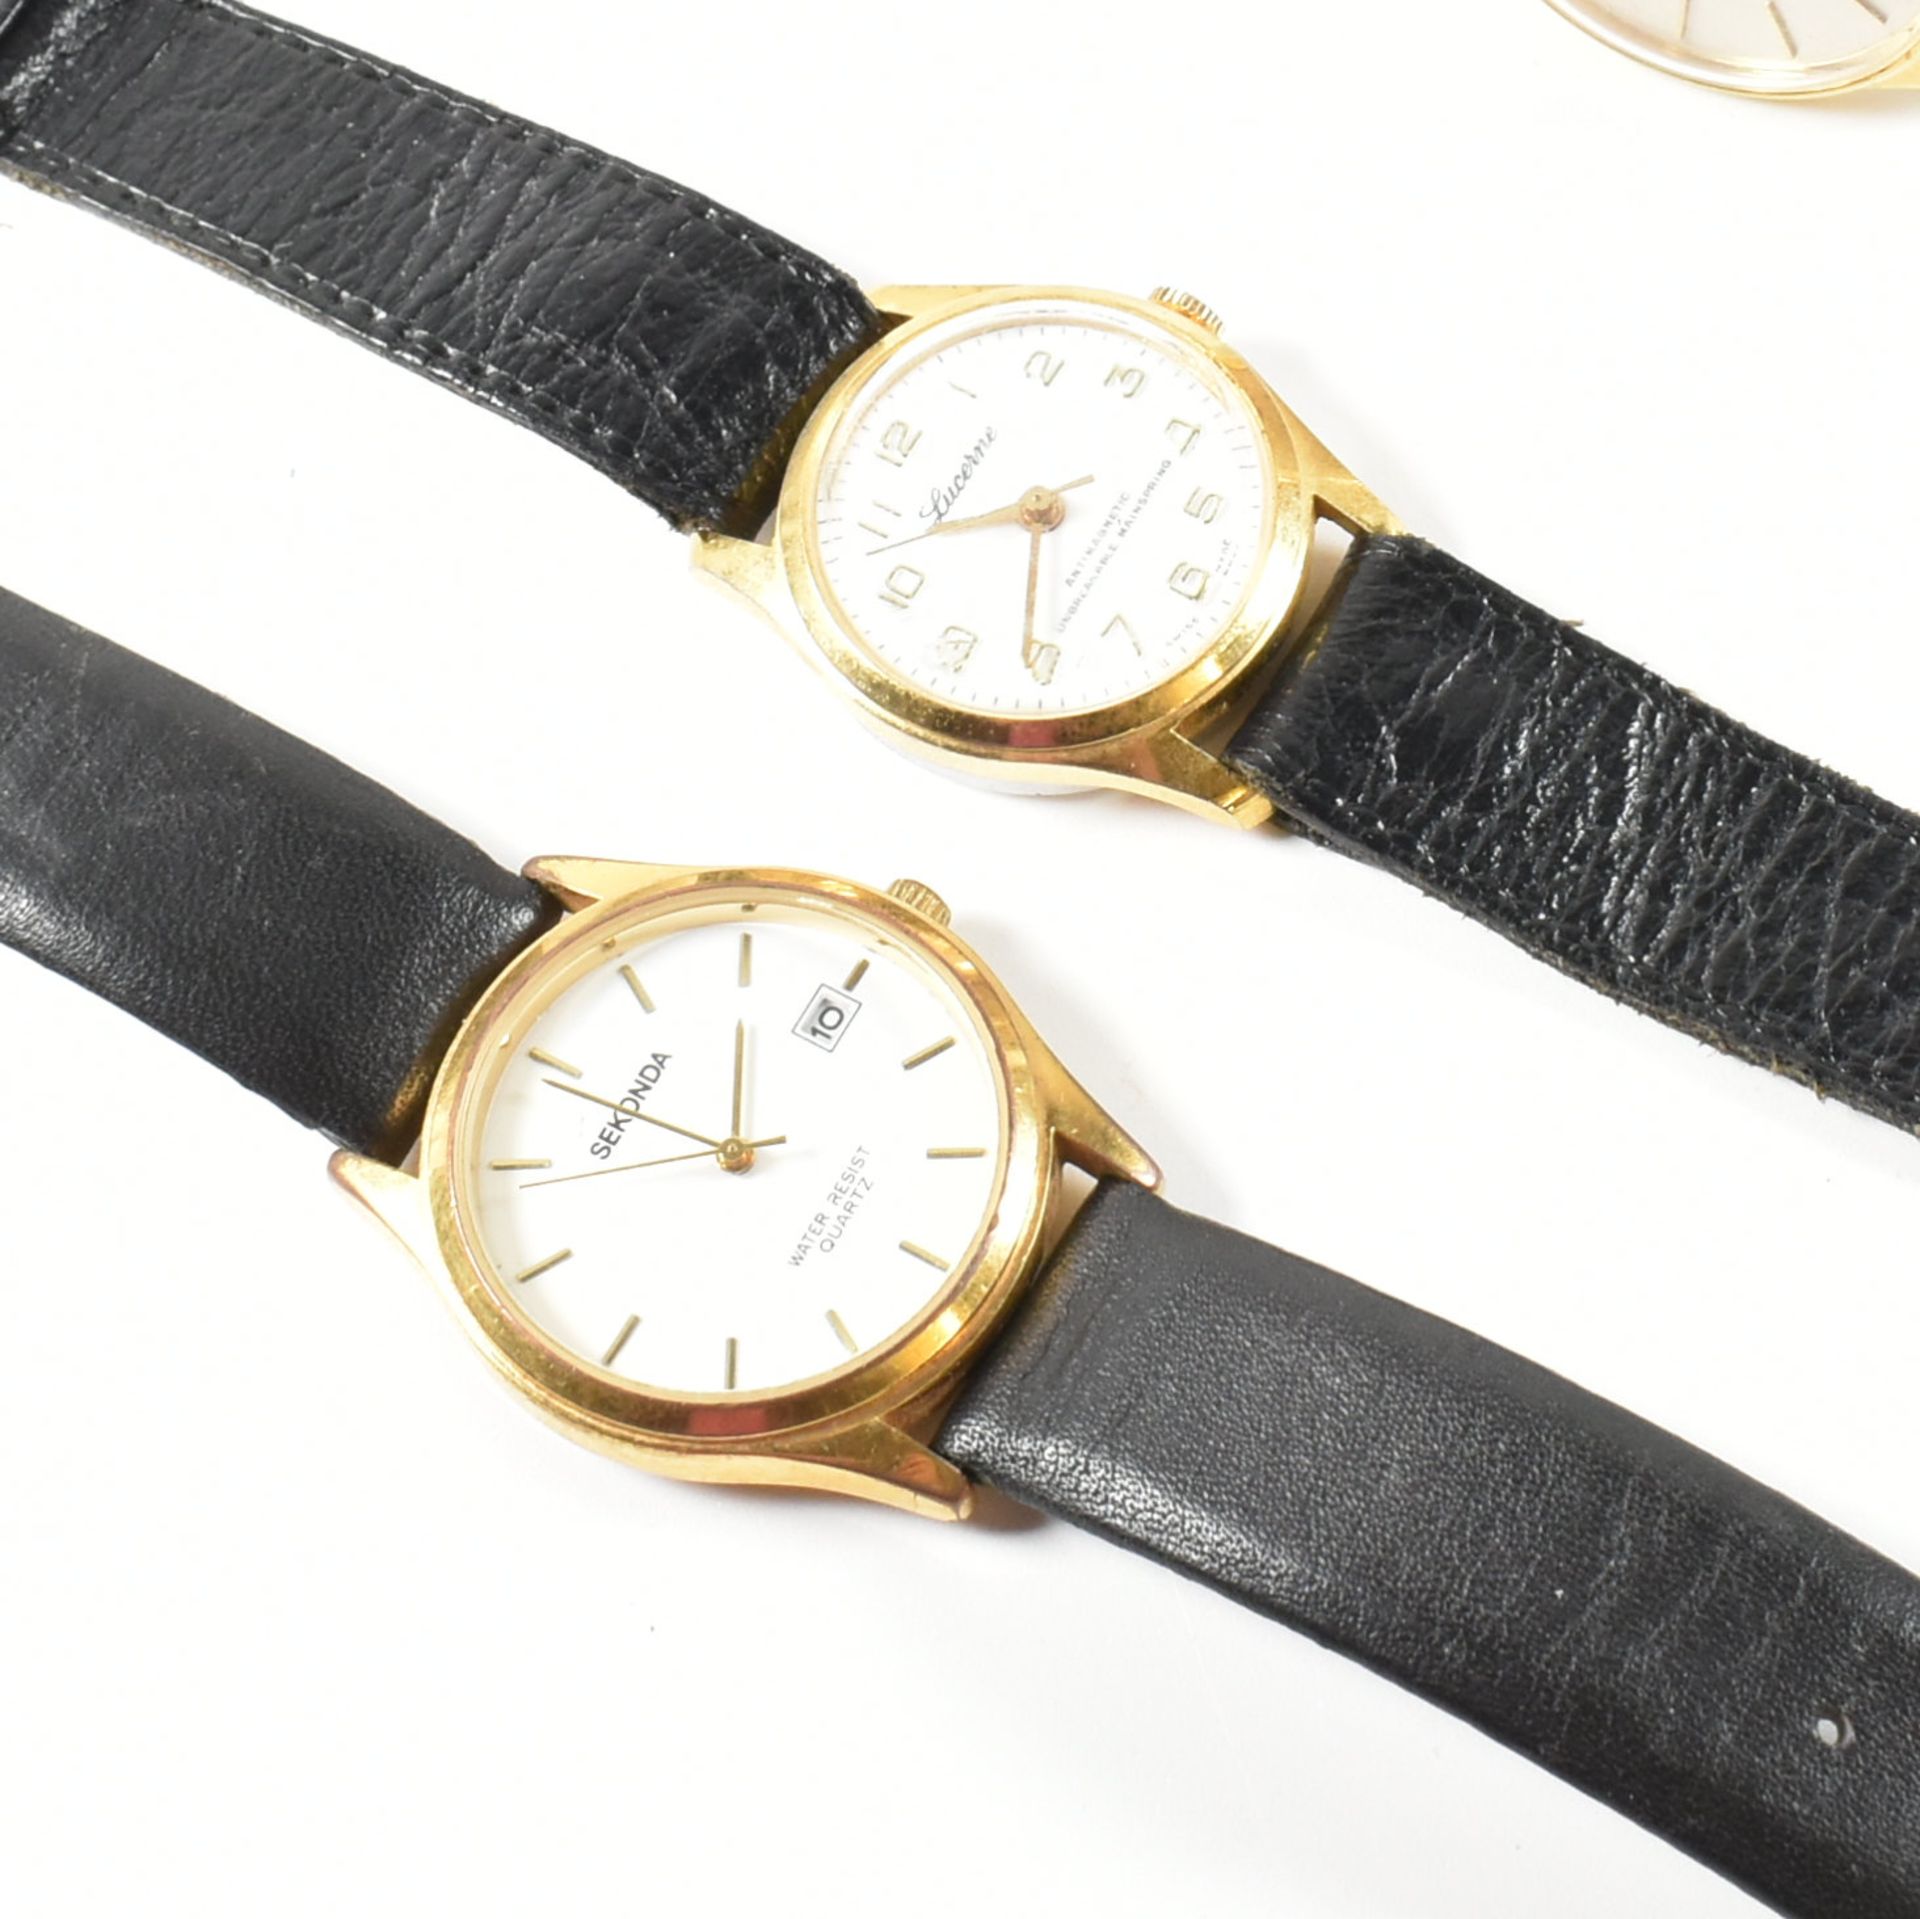 COLLECTION OF FOUR VINTAGE WATCHES - Image 4 of 6